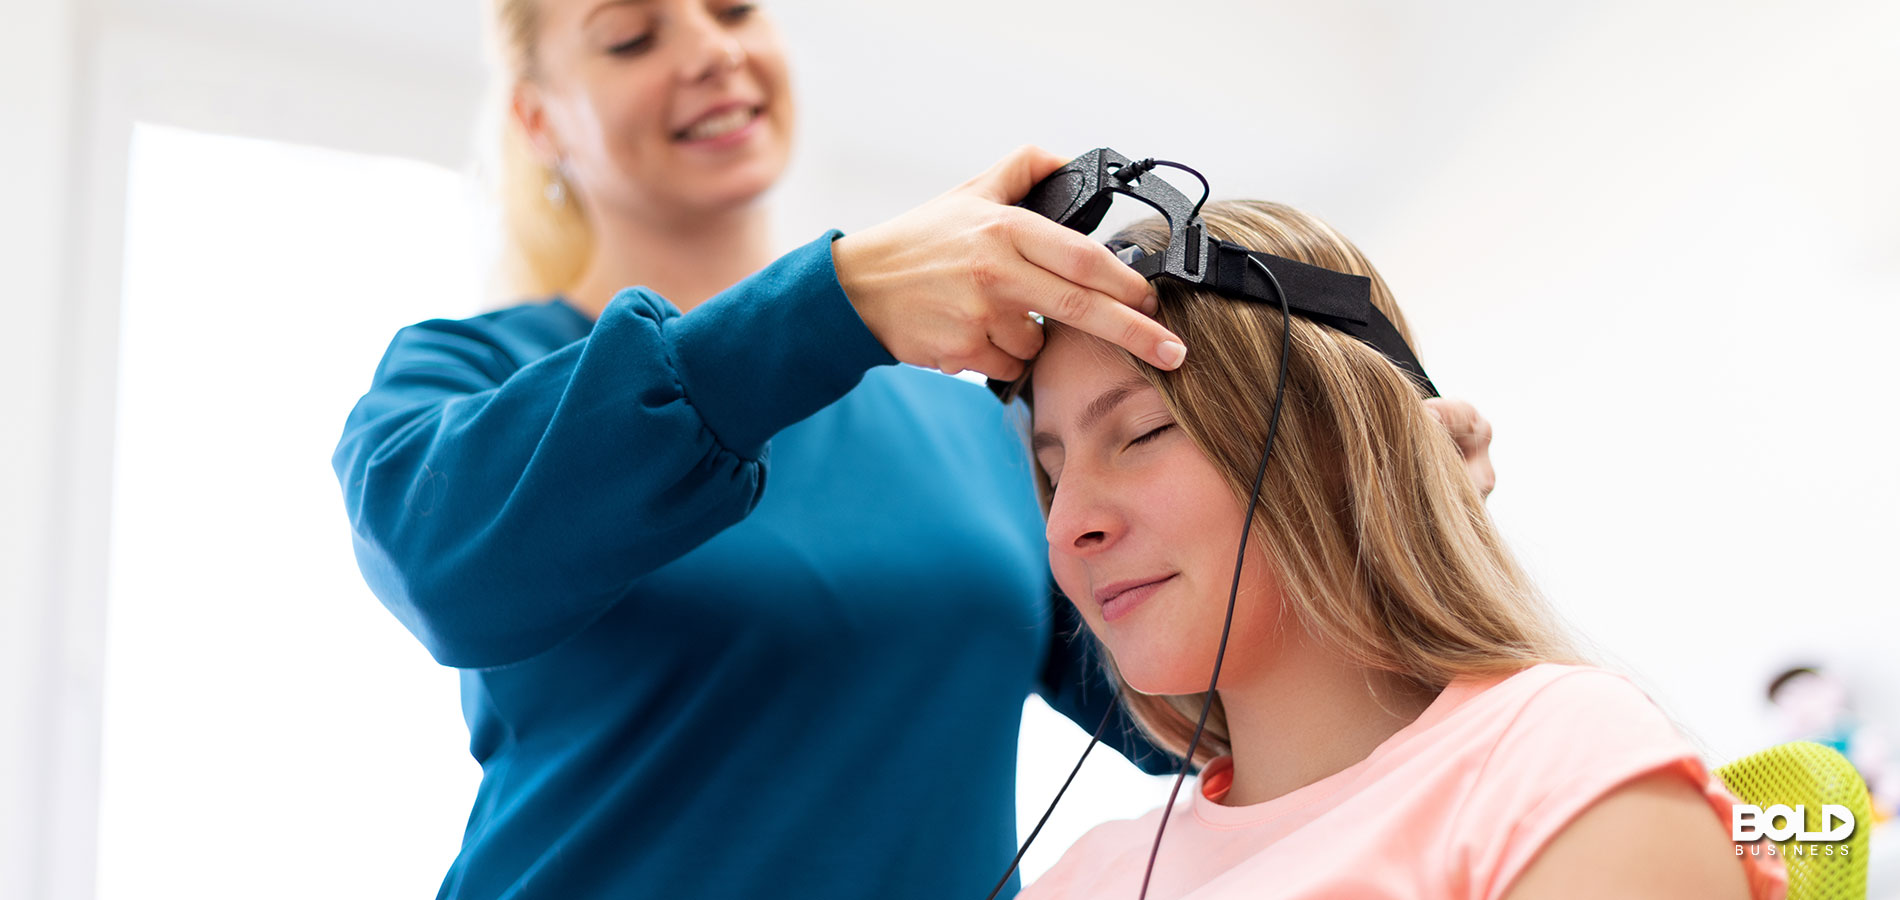 A woman helping another woman with her neurofeedback device